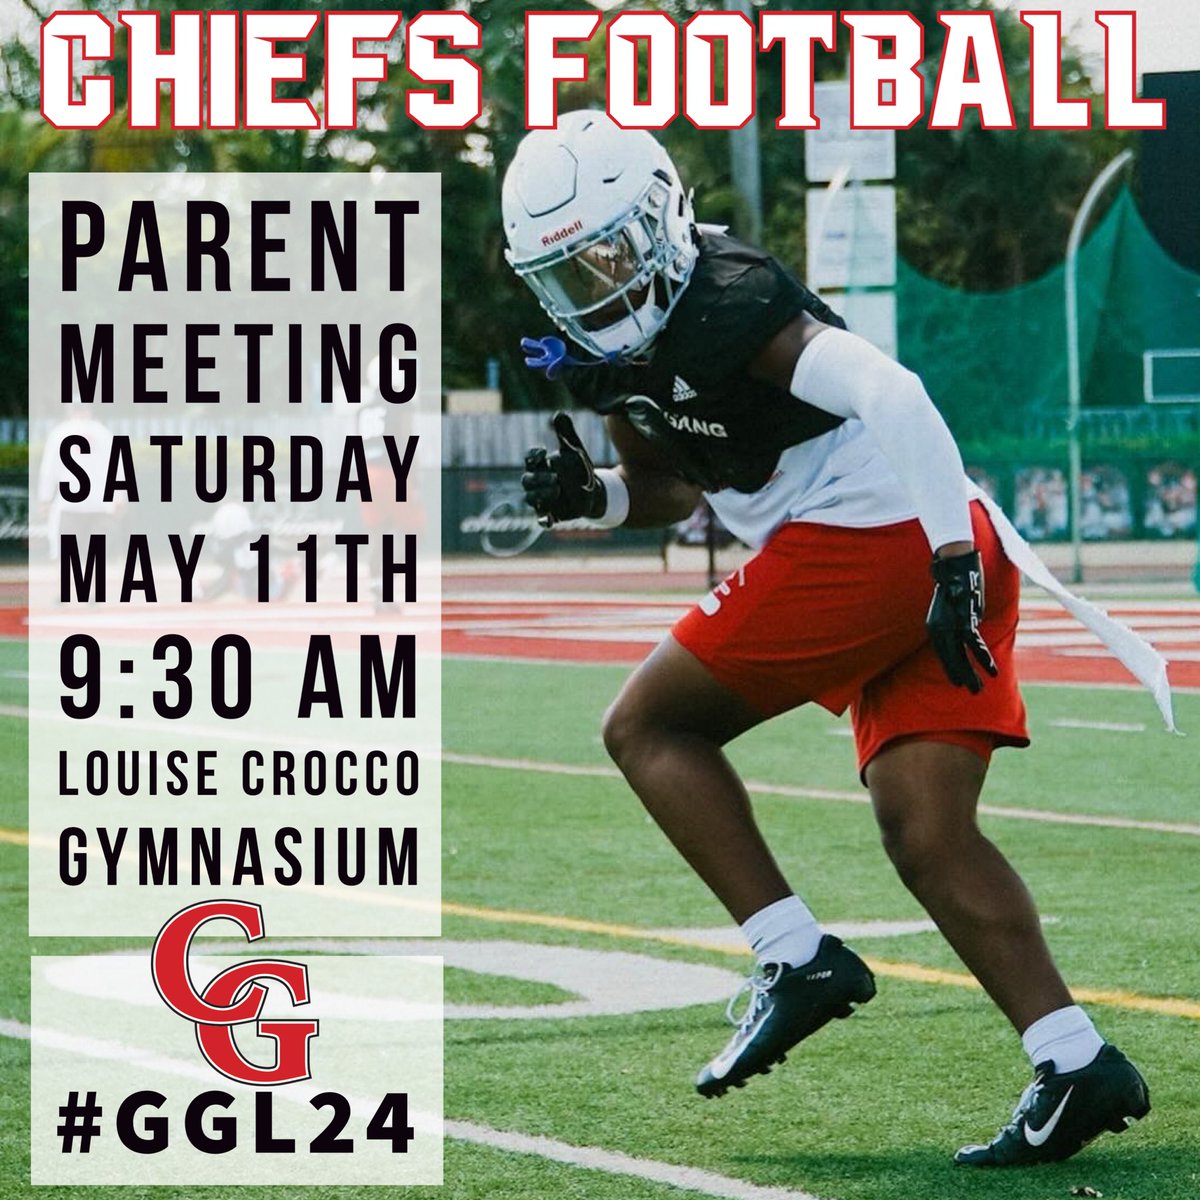 Looking forward to seeing you all at our Chiefs Football Parent Meeting this Saturday. #GGL24 🔴⚪️🛎️🗣